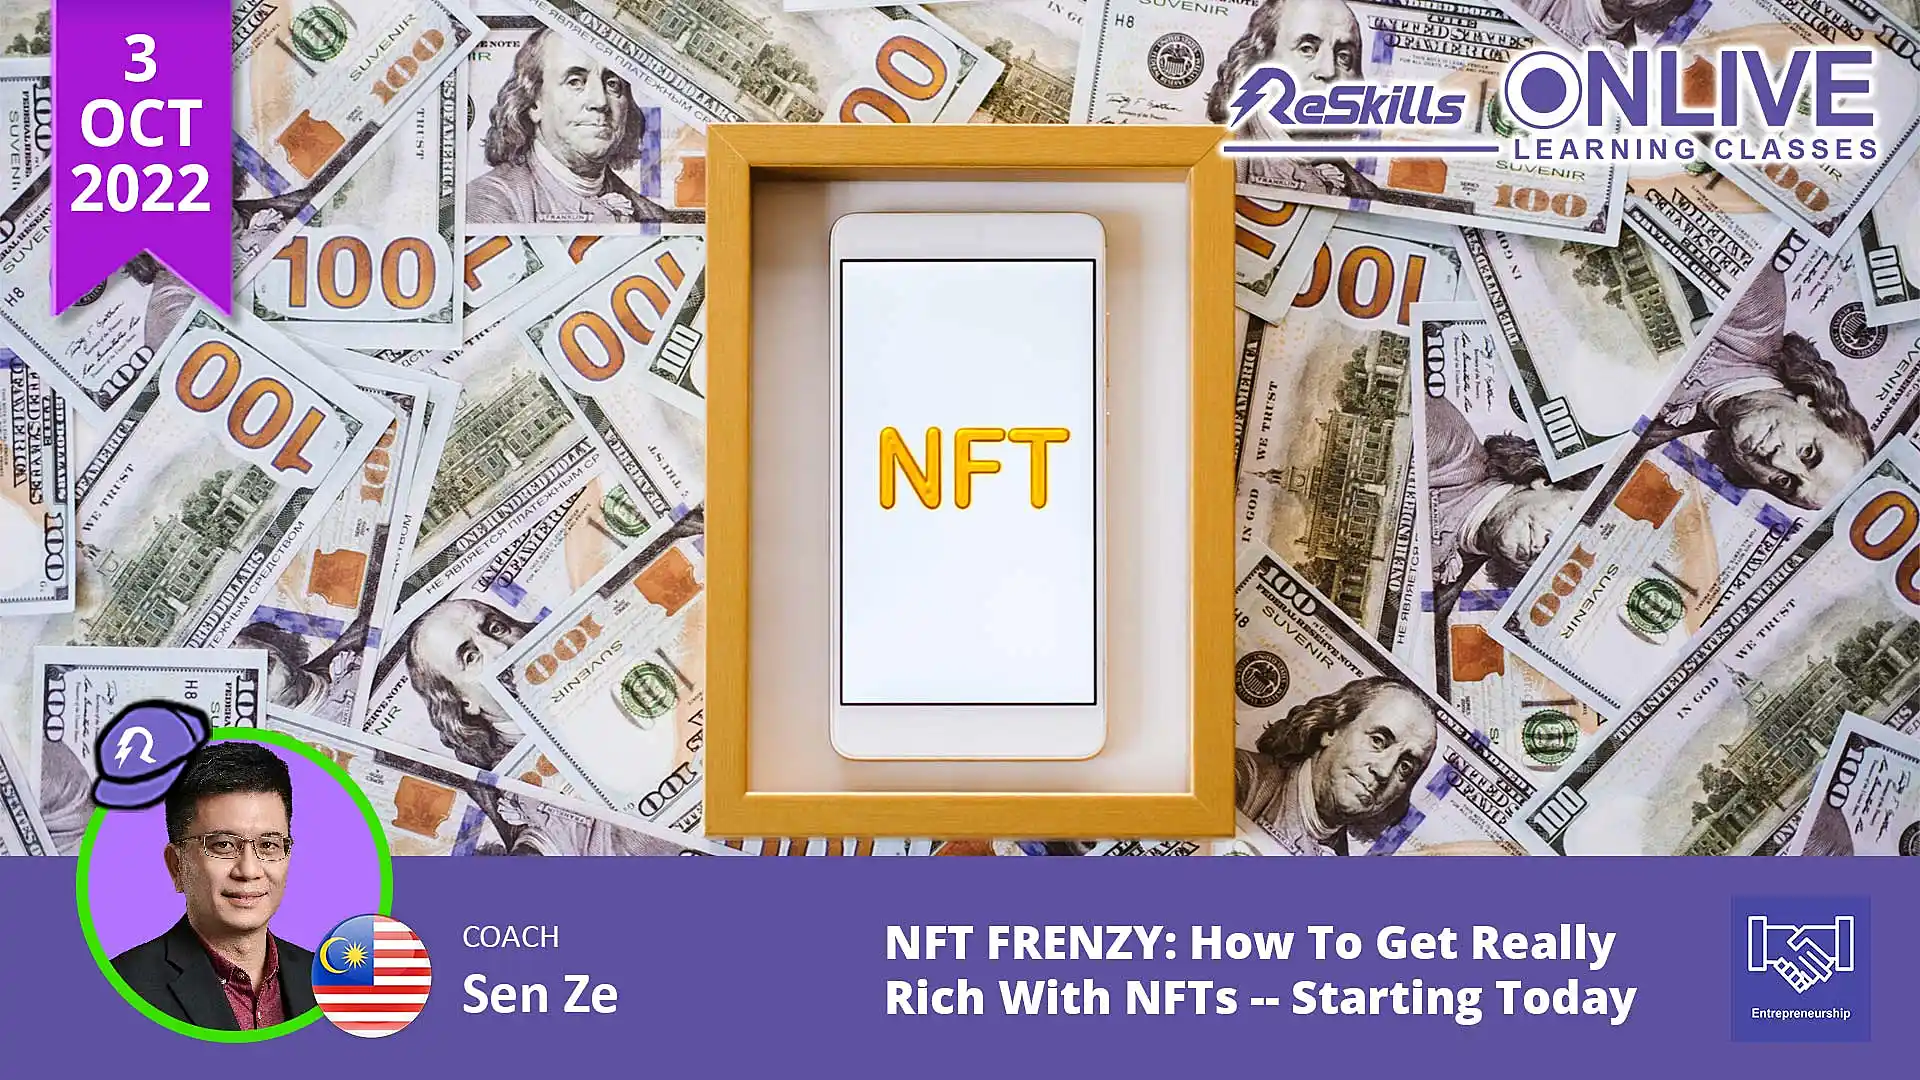 NFT FRENZY: How To Get Really Rich With NFTs -- Starting Today - ReSkills